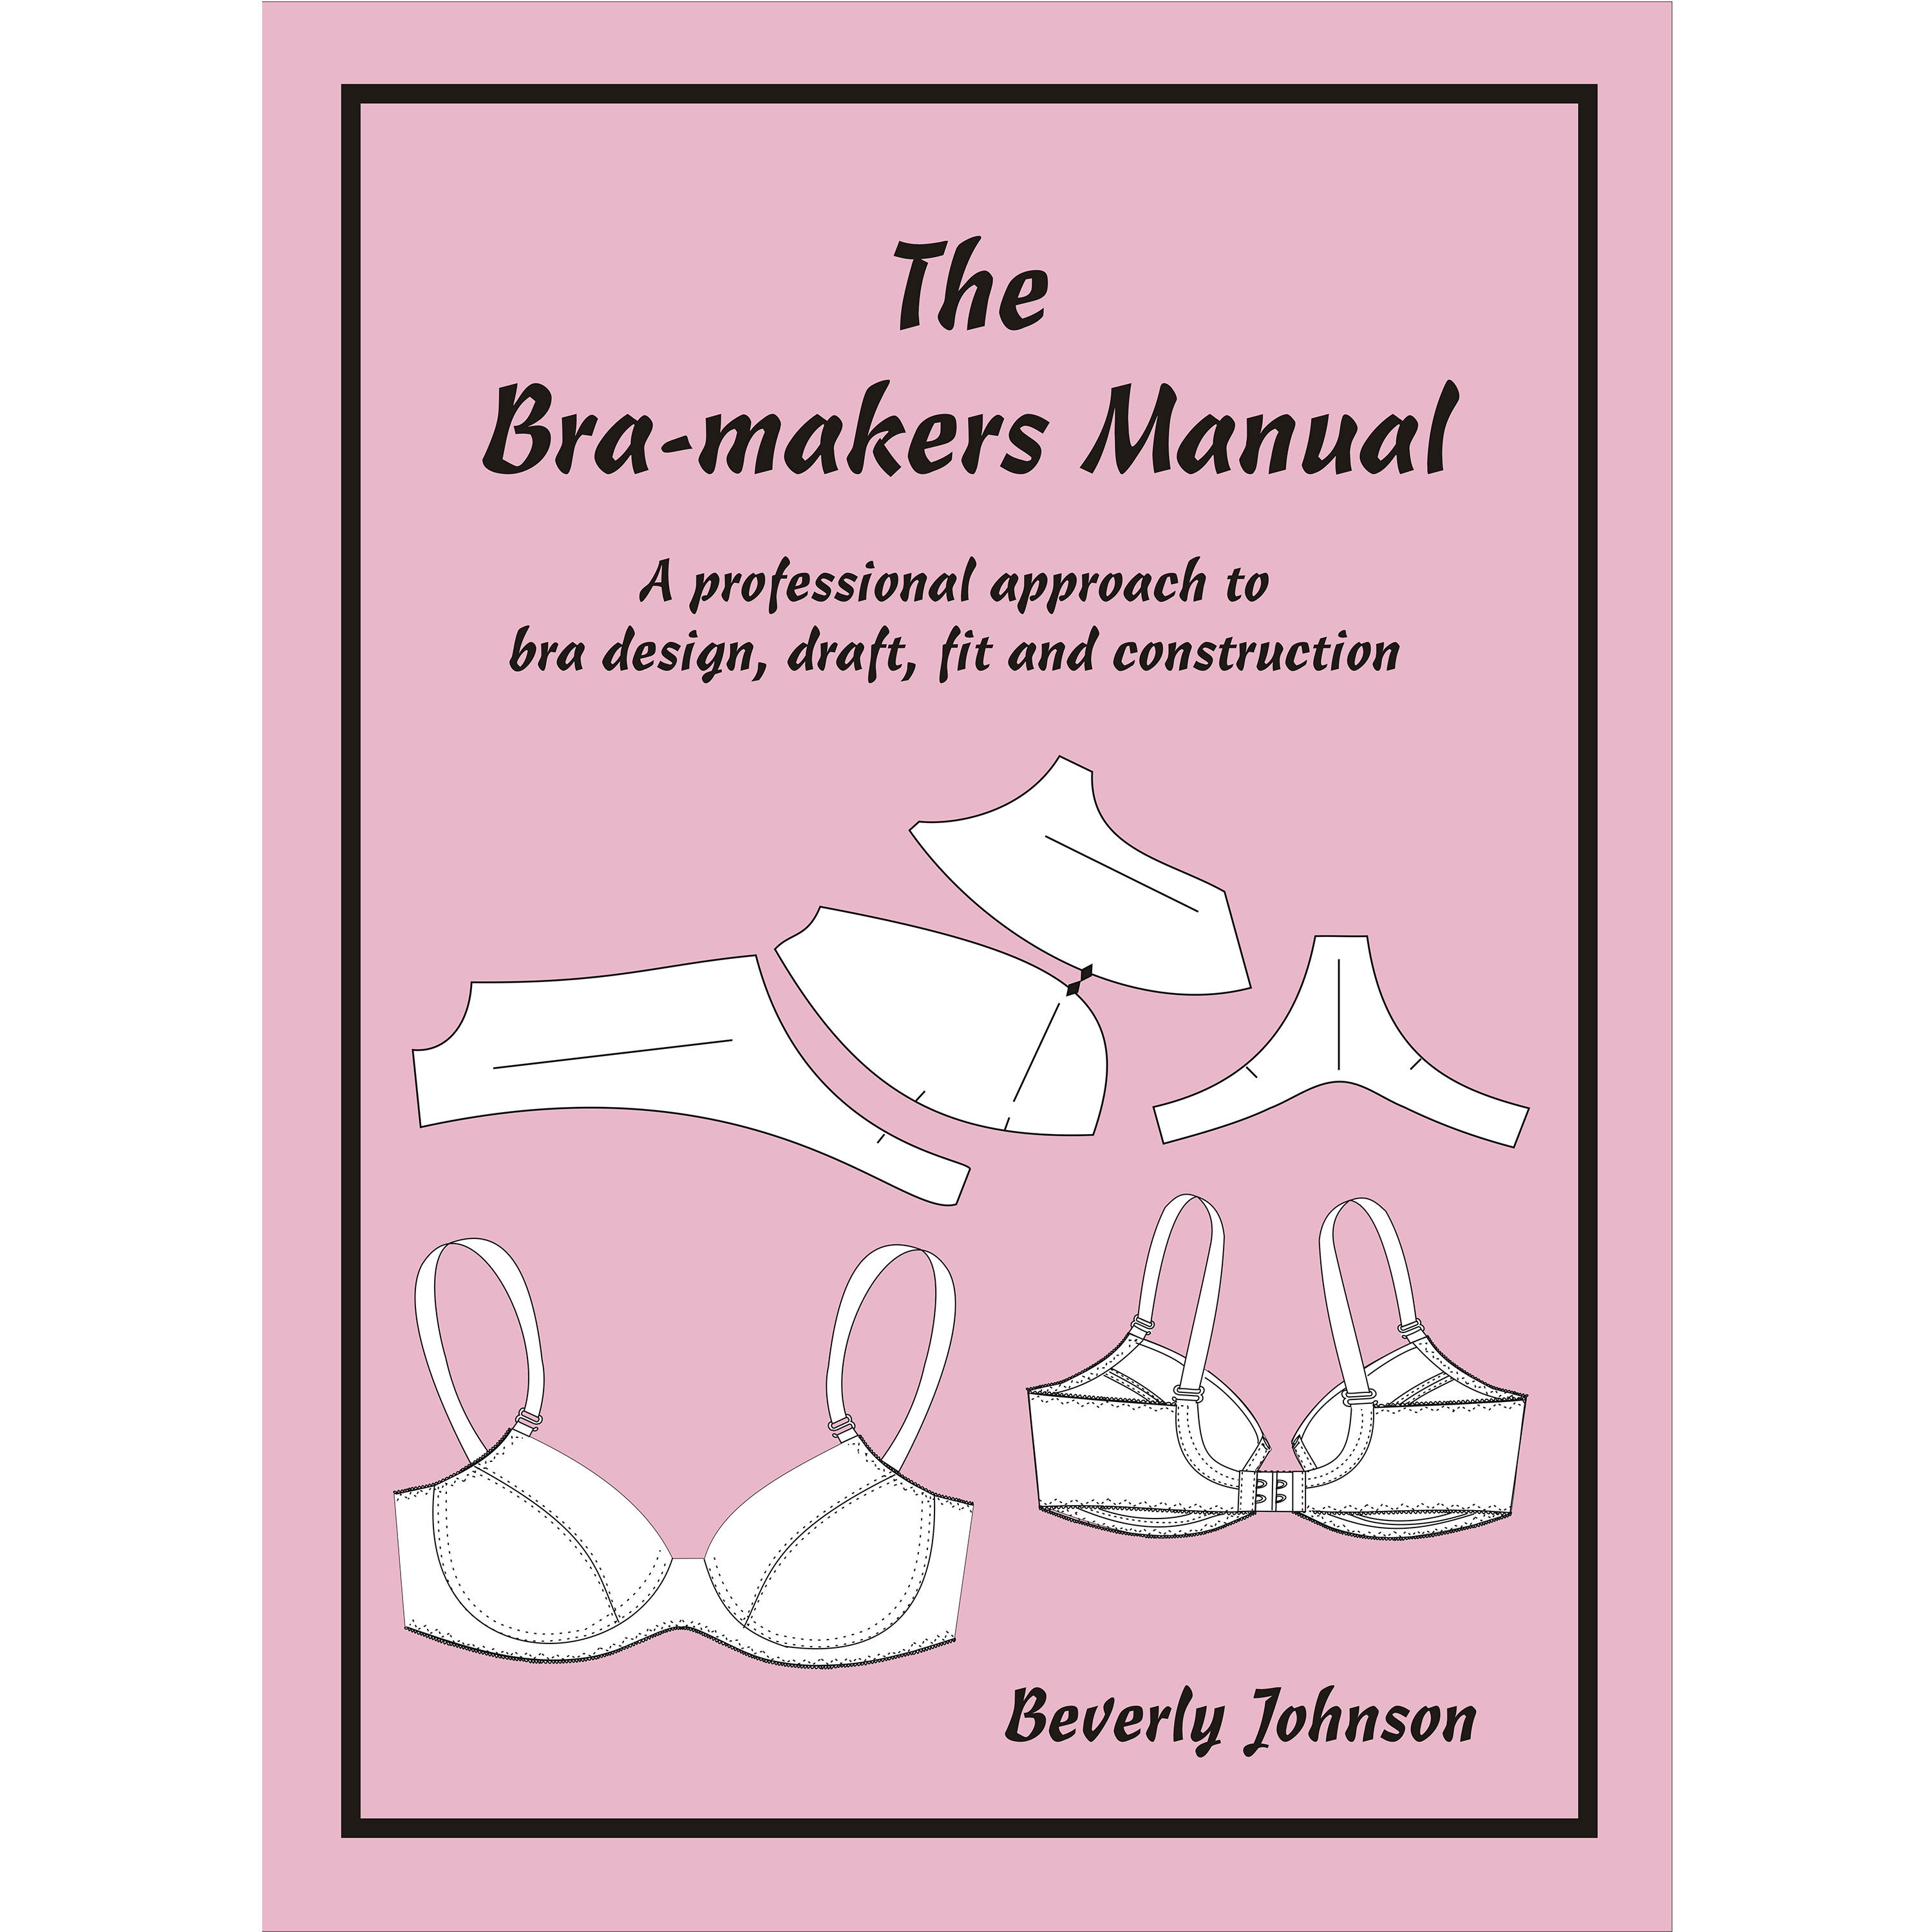 Specialty Bra Maker Learns Business